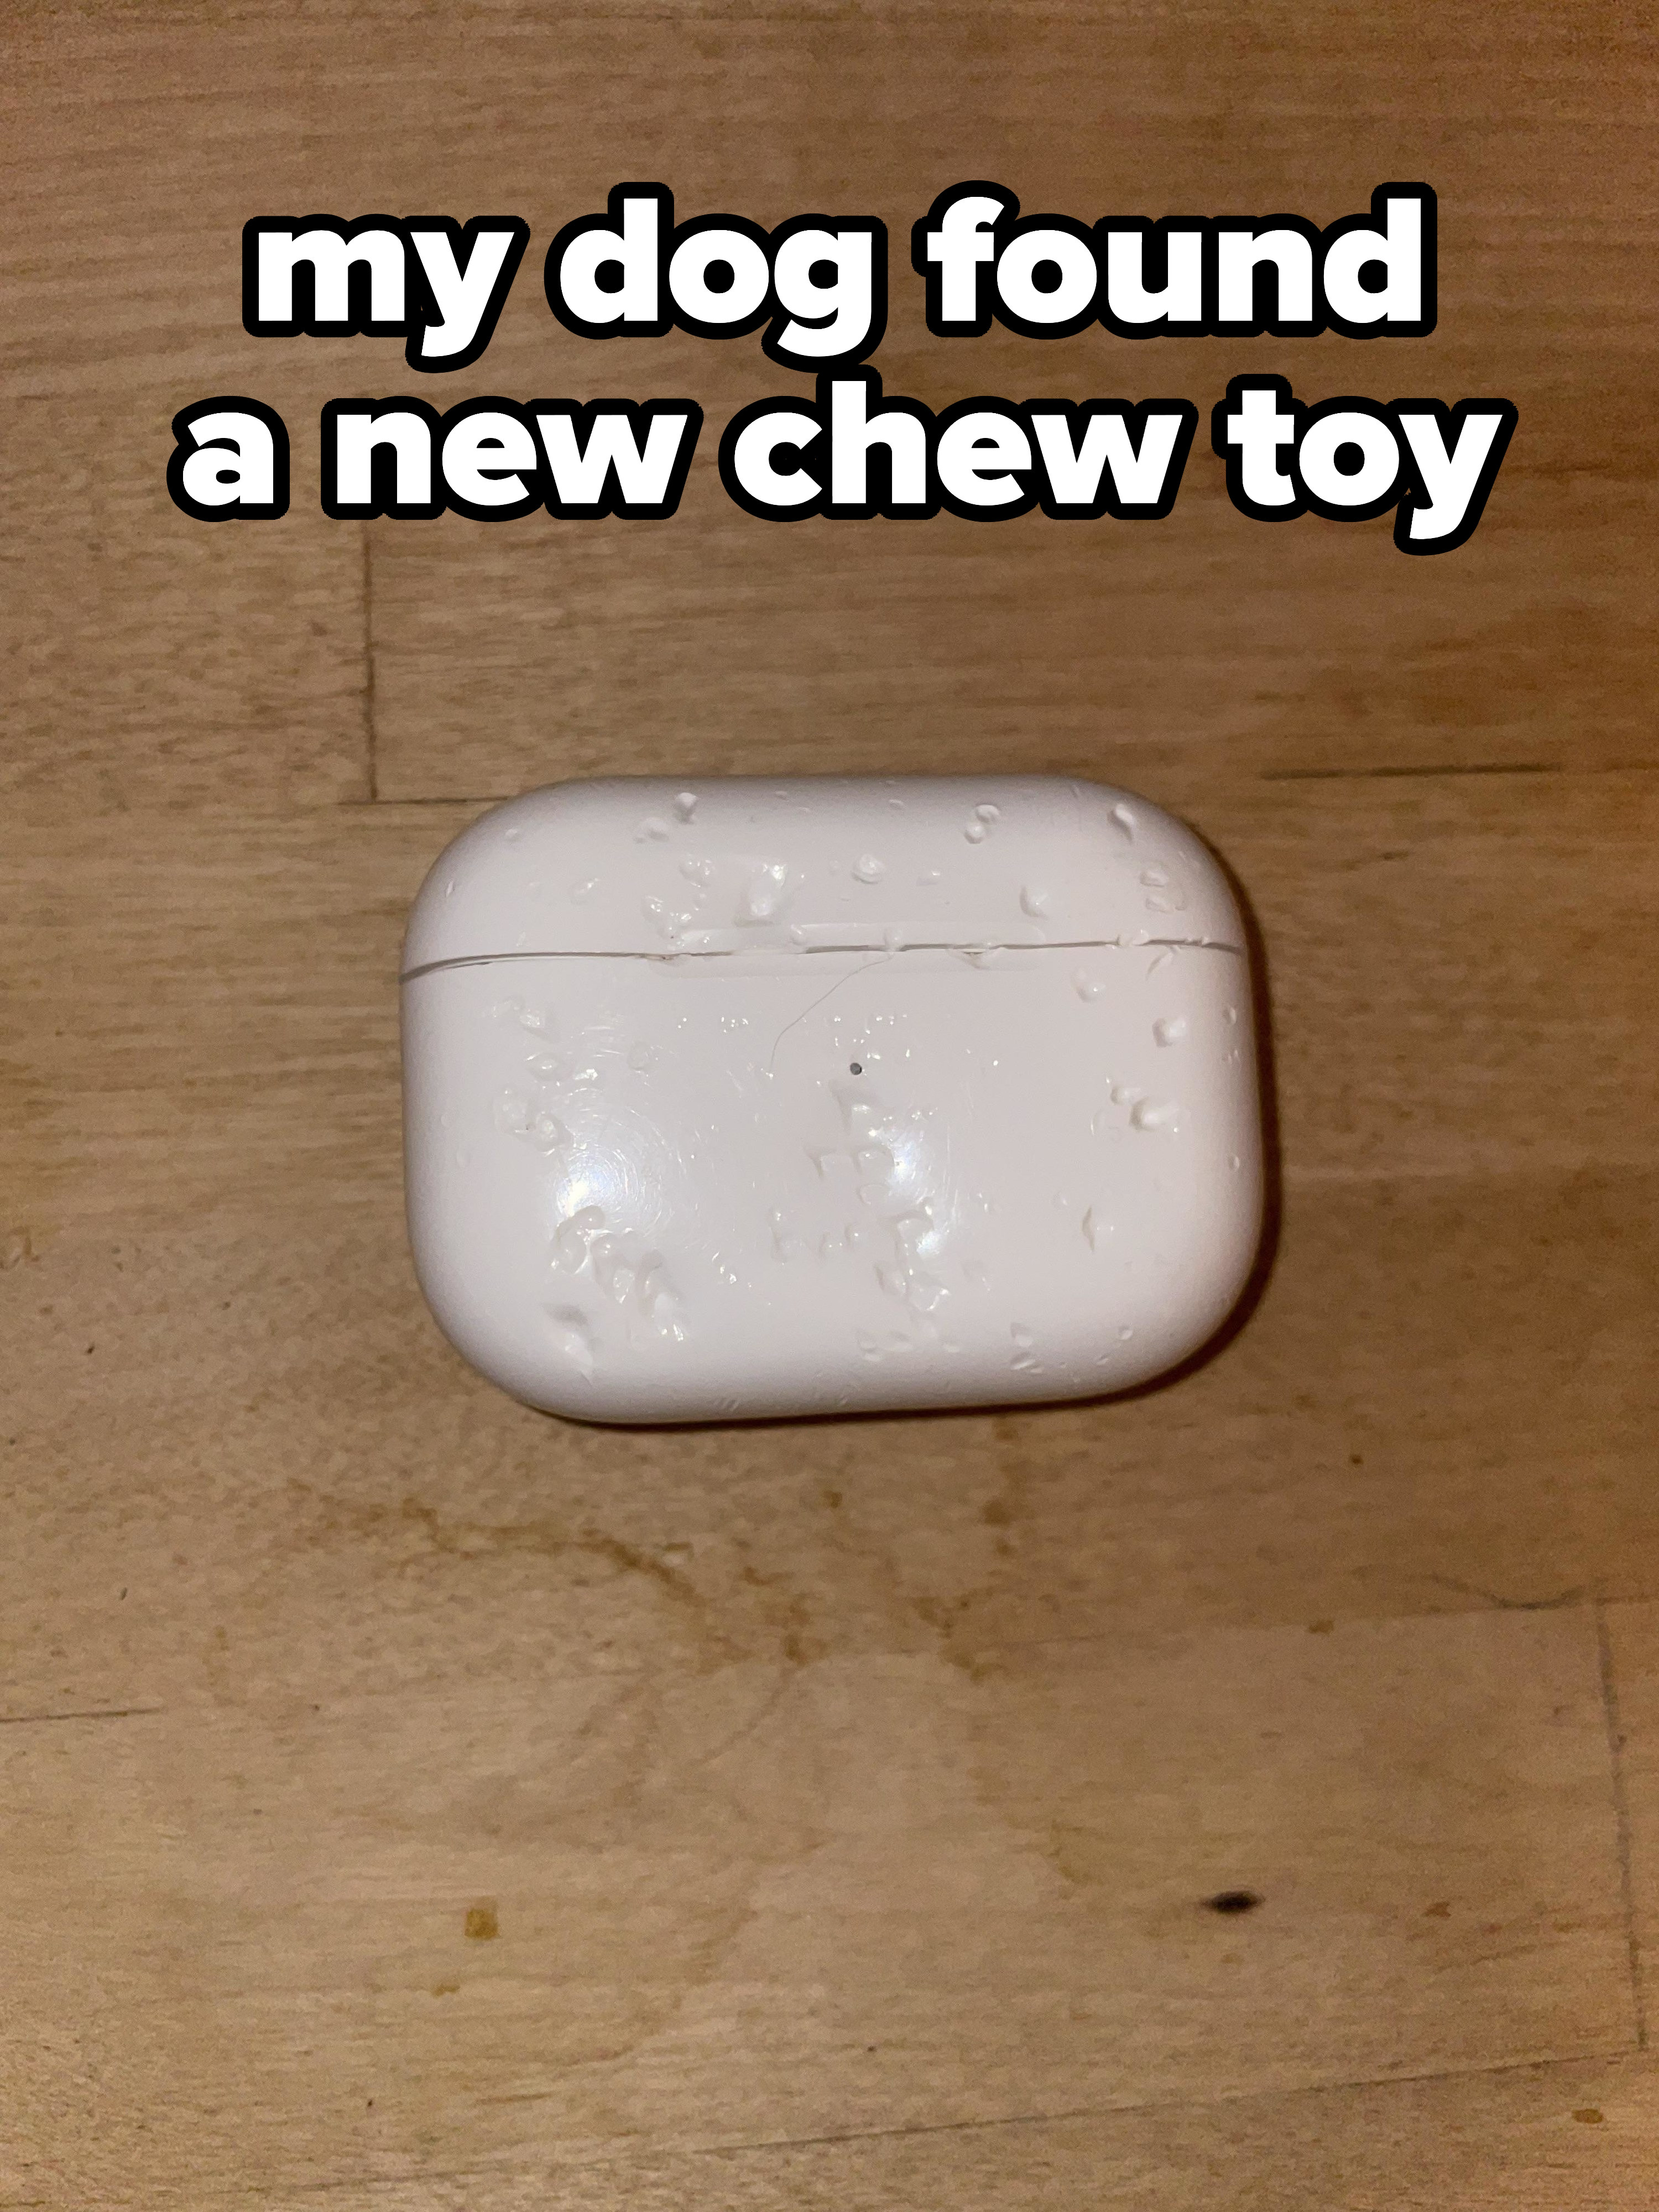 A chewed-up AirPod case